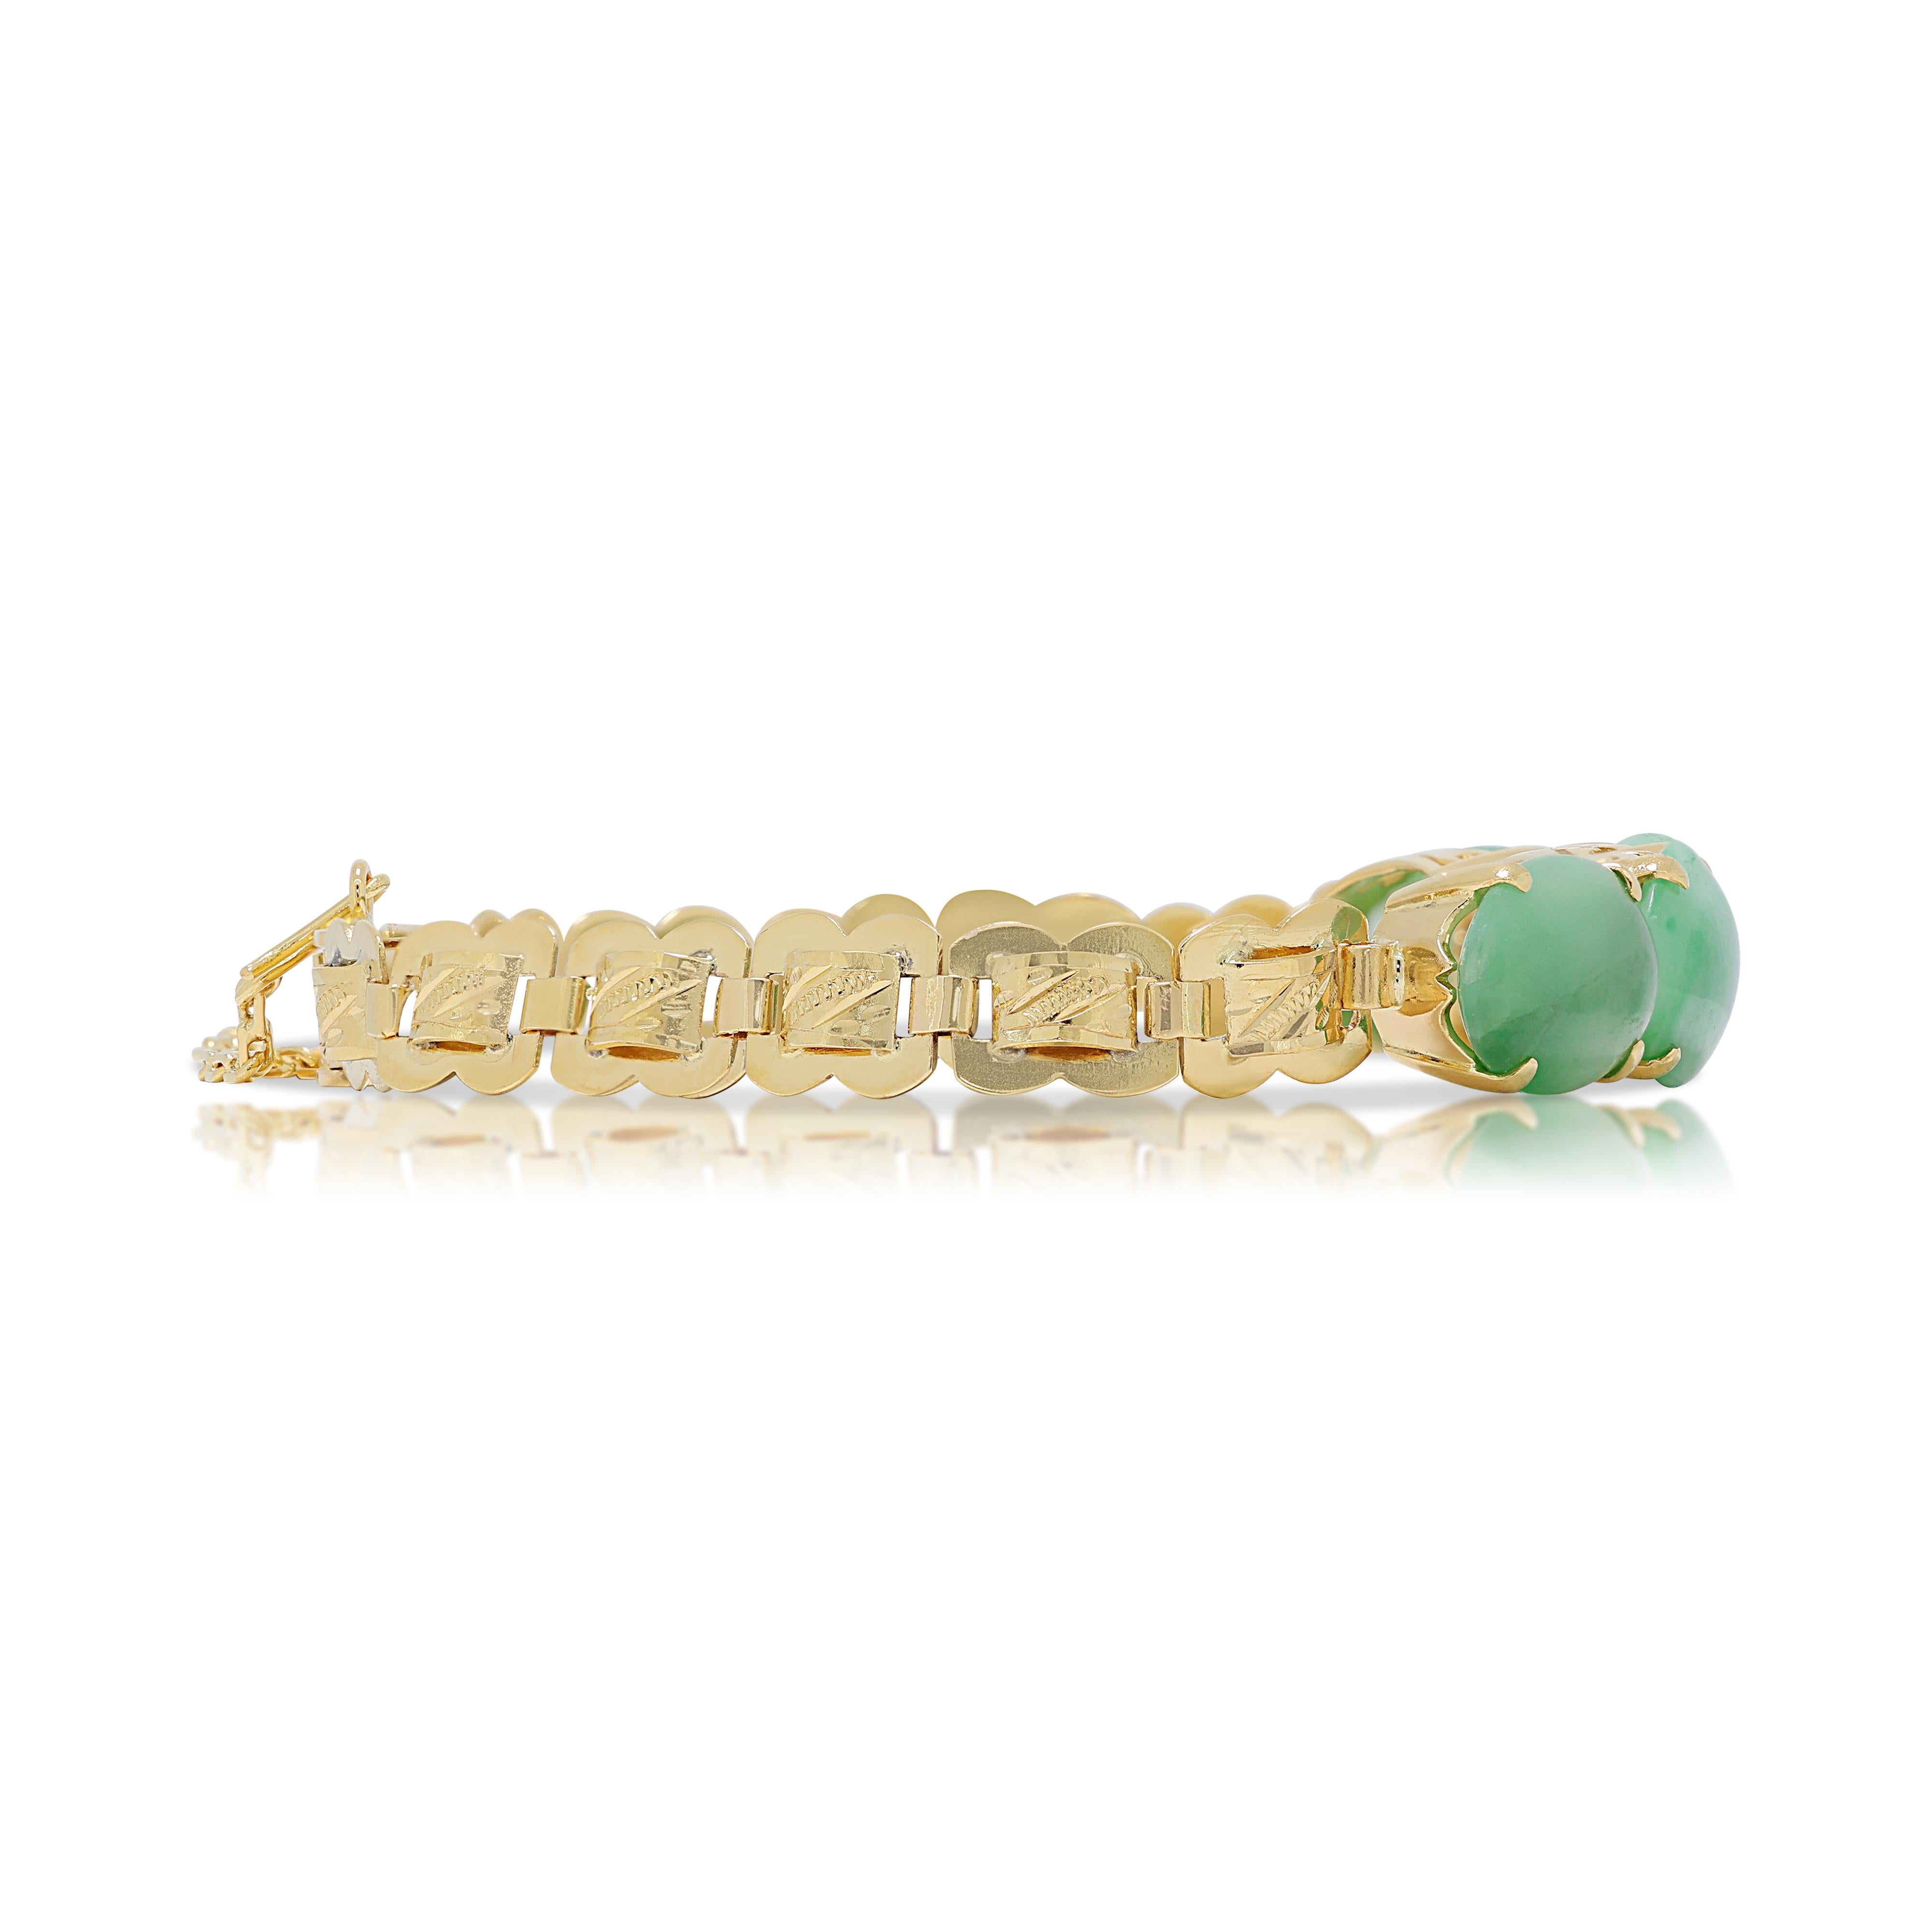 Women's Magnificent 19.17ct Jade-Cabochon Bracelet in 22k Yellow Gold